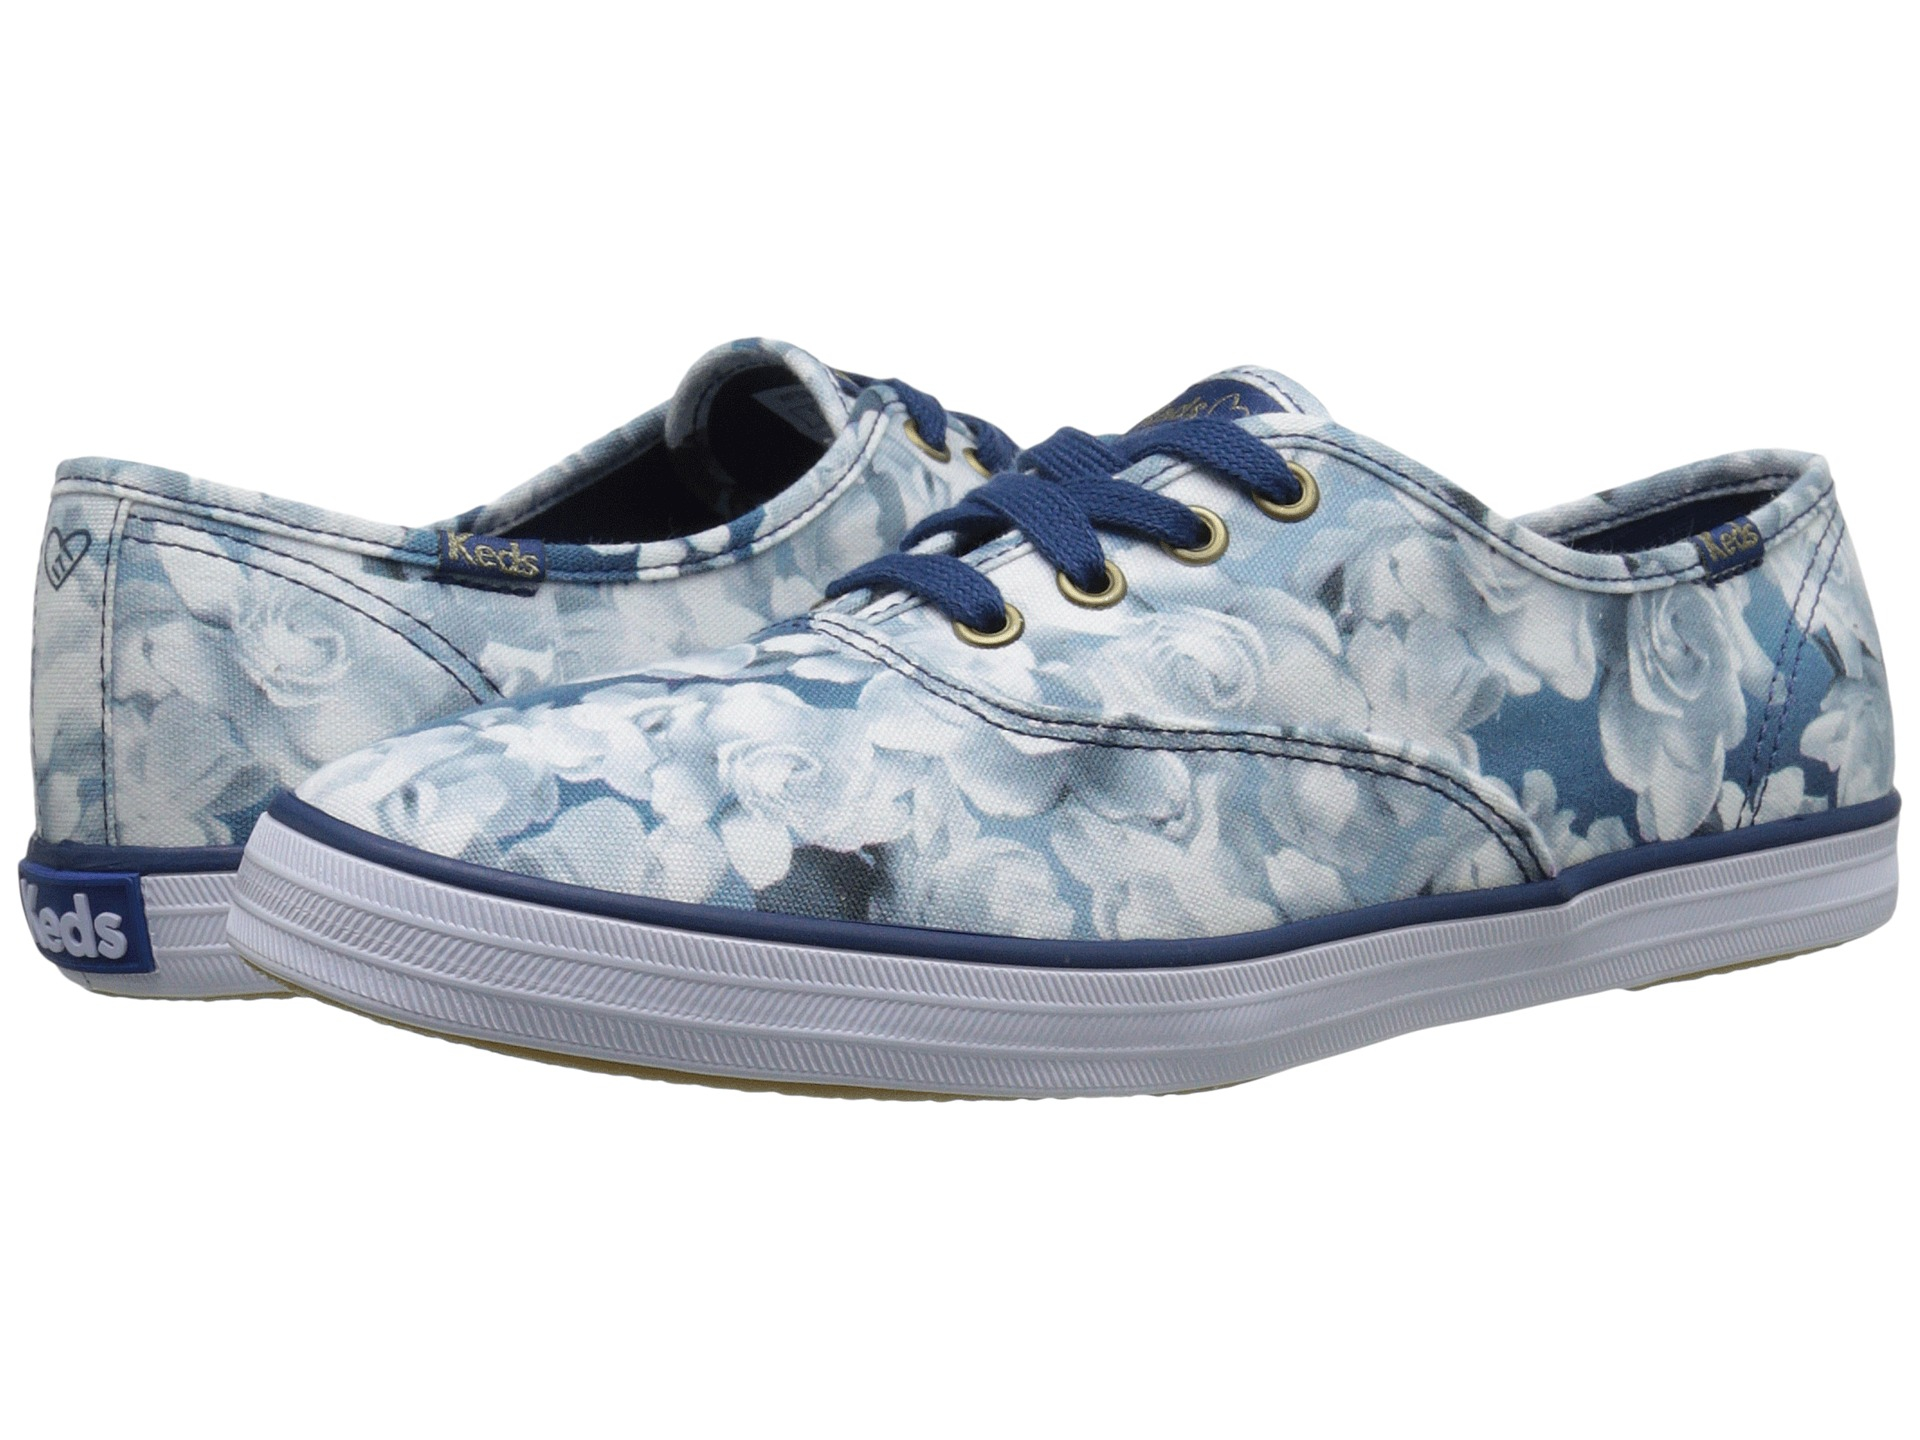 Keds Taylor Swift's Champion Floral Print in Deep Blue (Blue) - Lyst